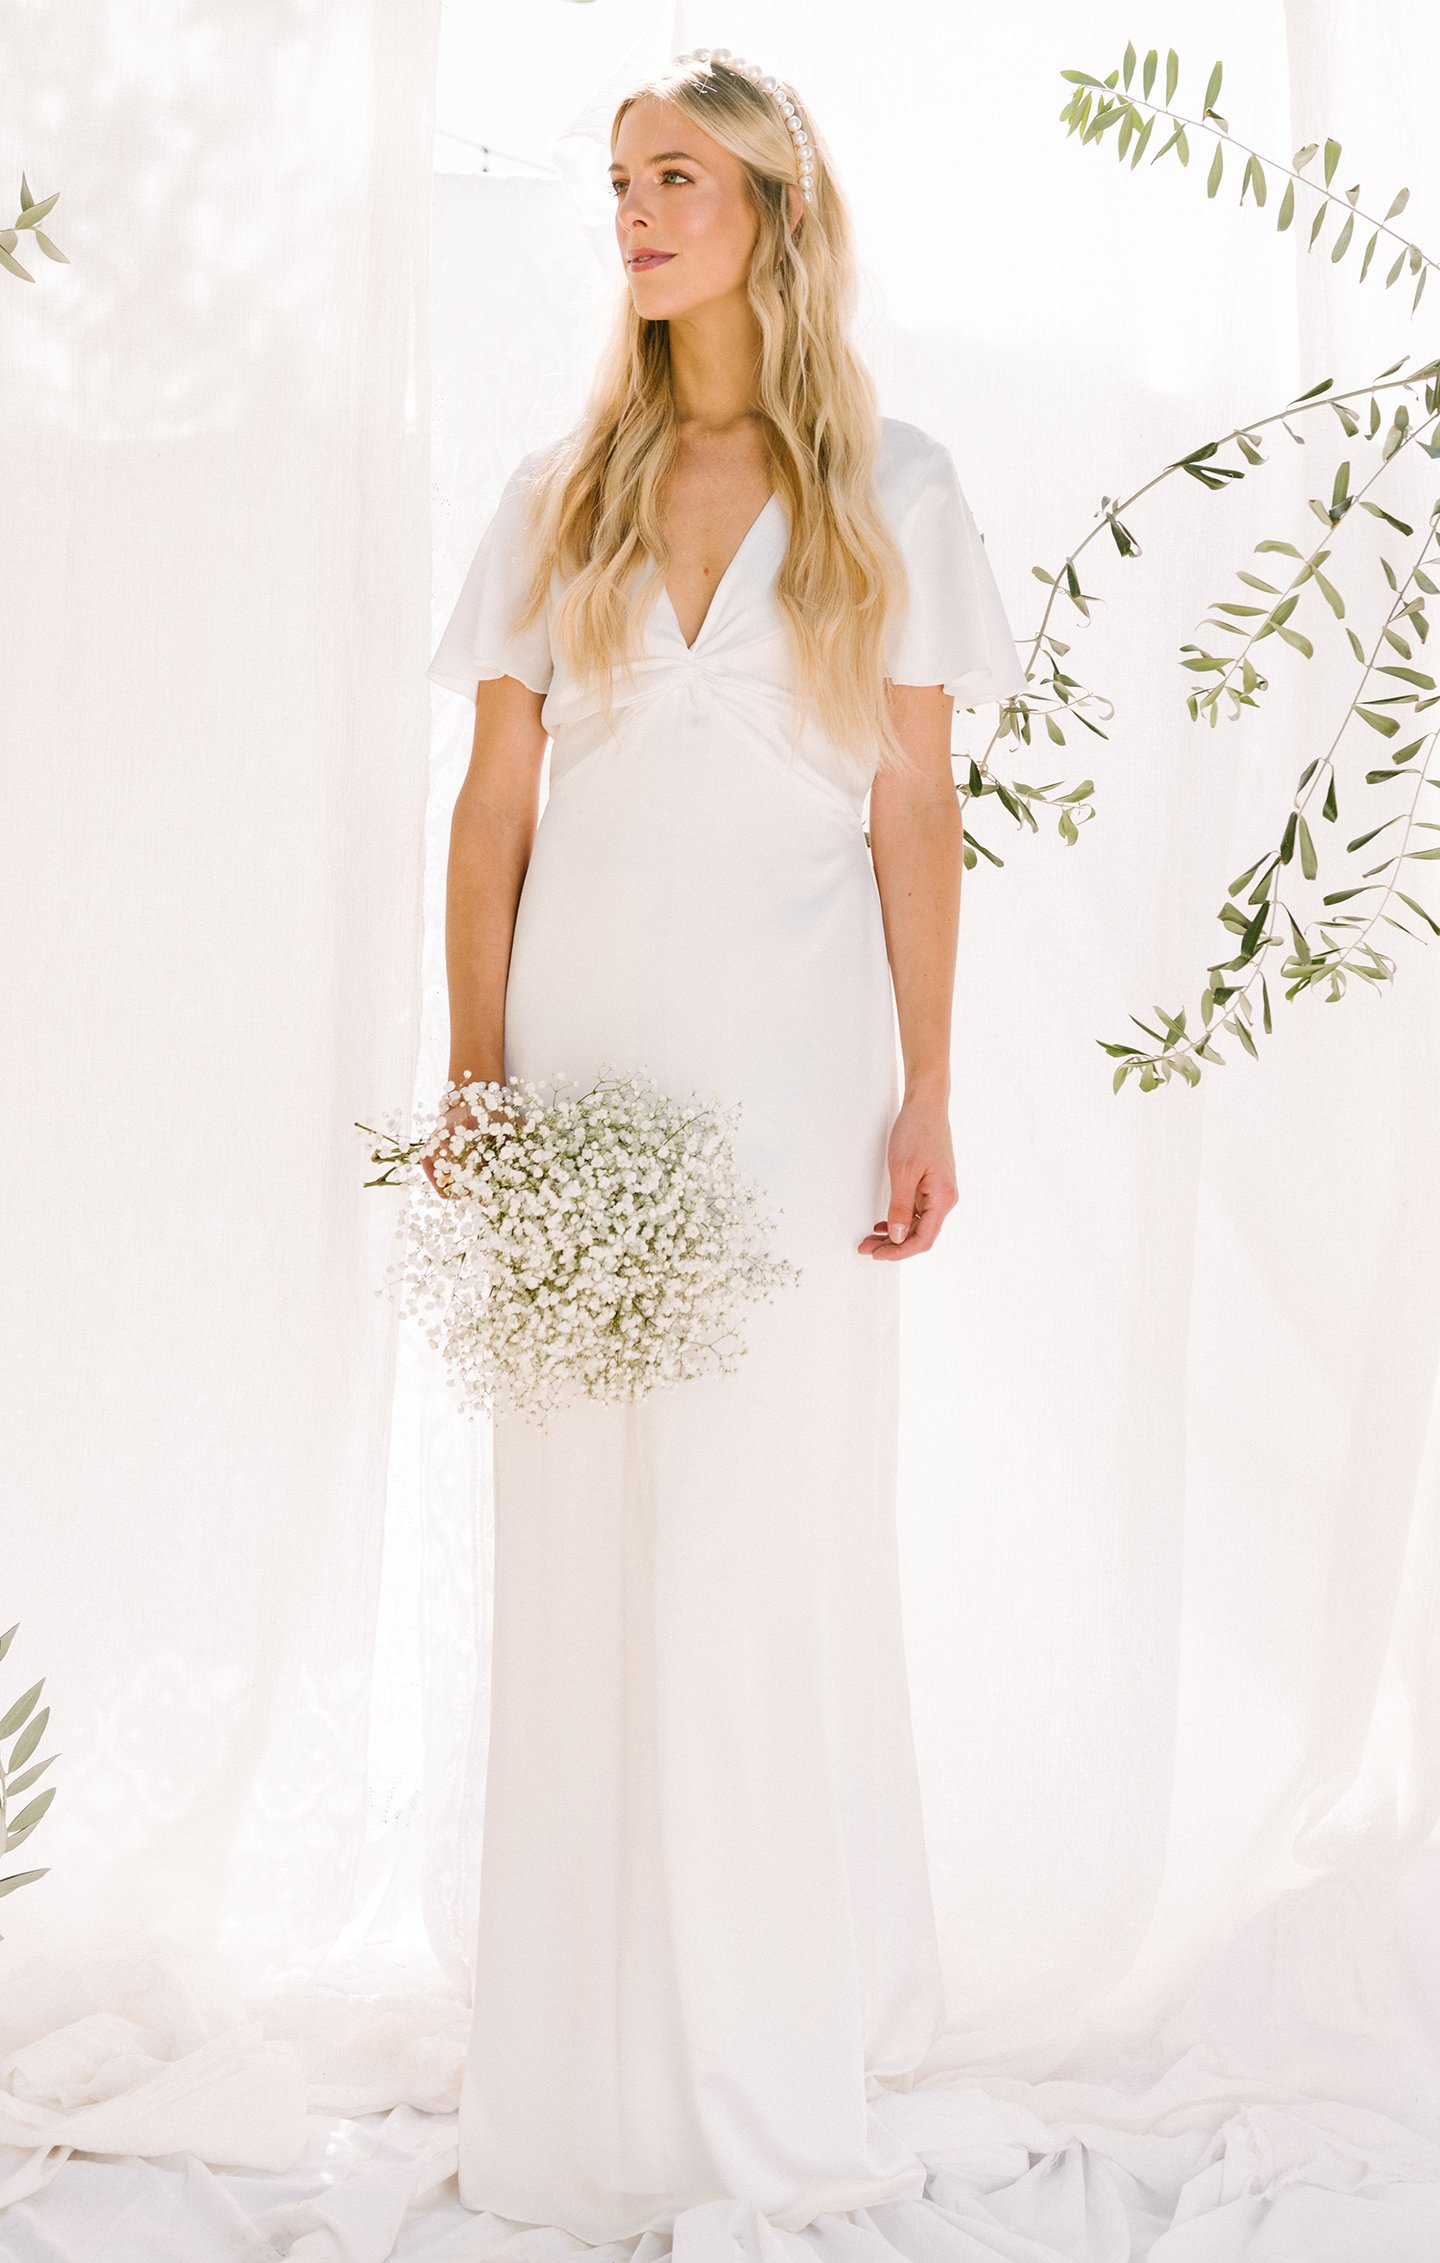 Woman with light hair in off the rack white simple wedding dress